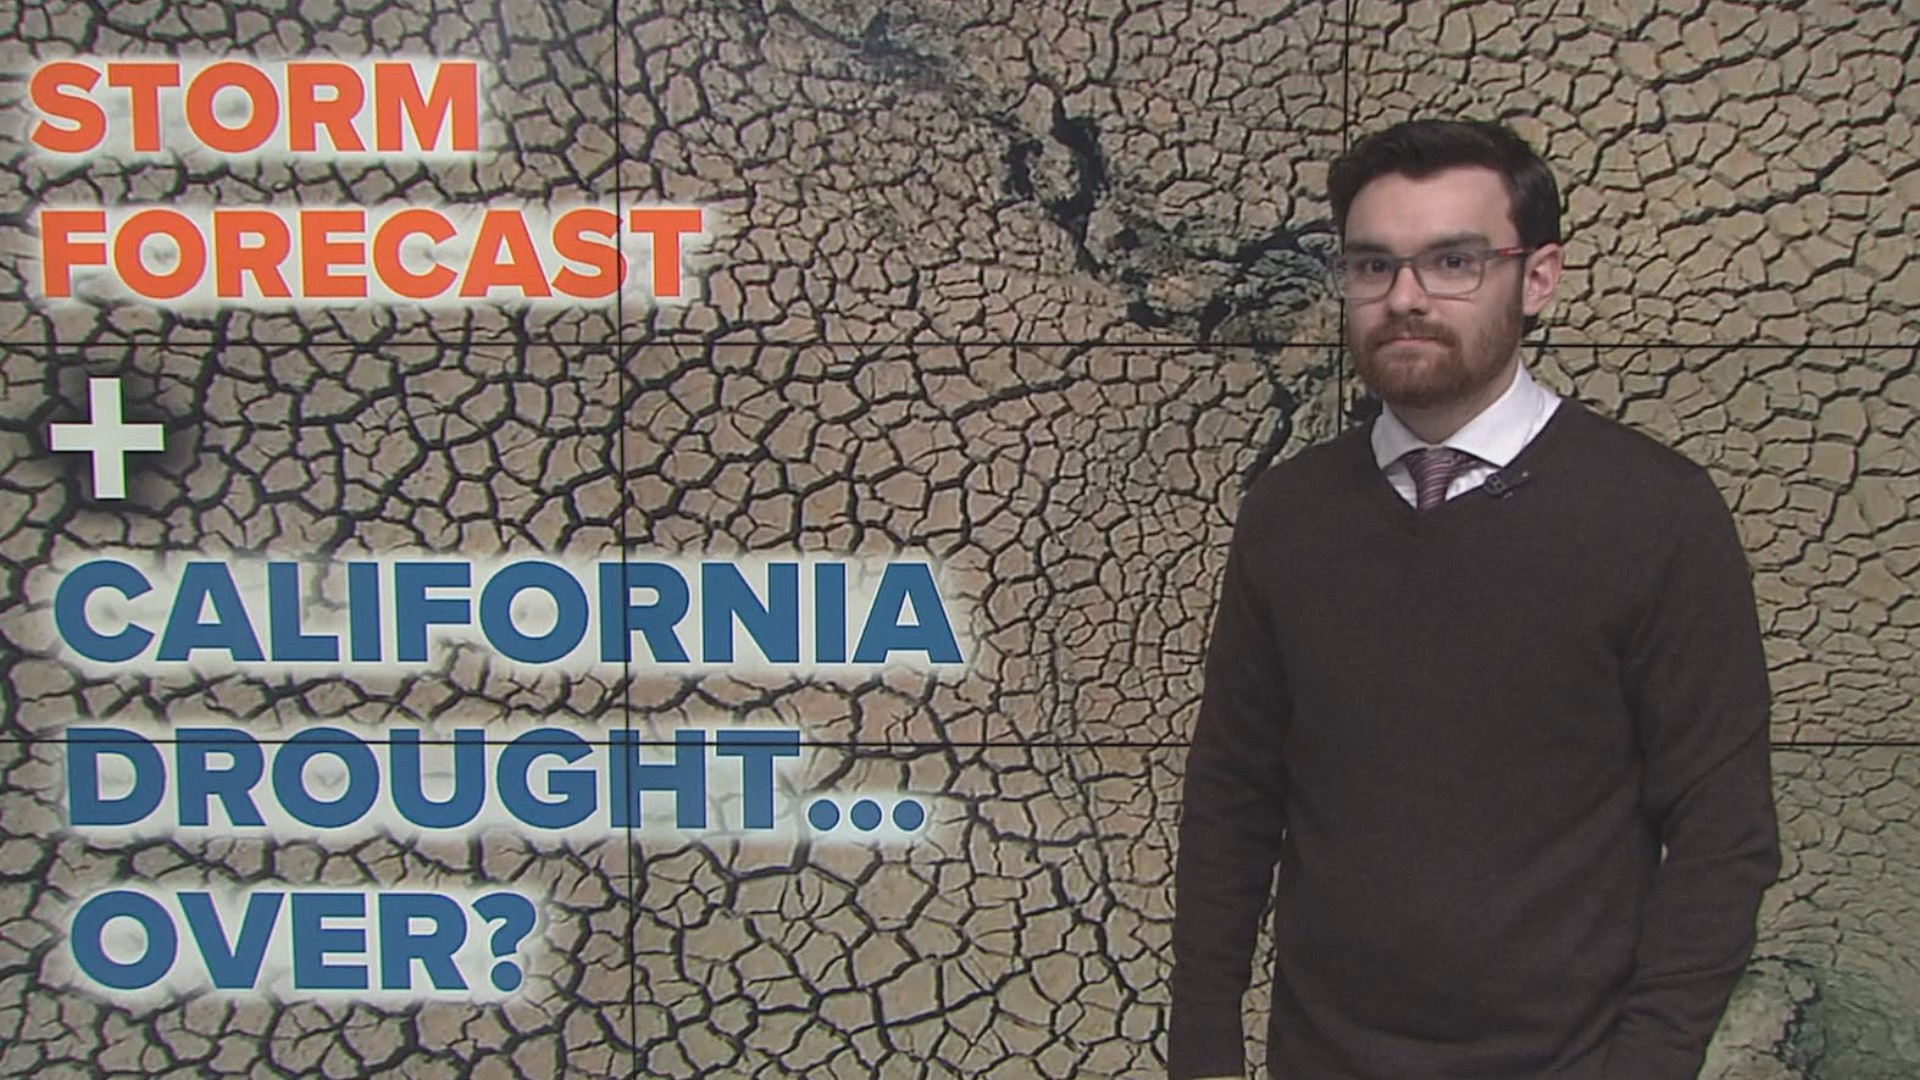 ABC10 meteorologist Brenden Mincheff gives an update on this week's incoming storm that will bring rain and flooding. Plus, we ask the question: is the drought over?